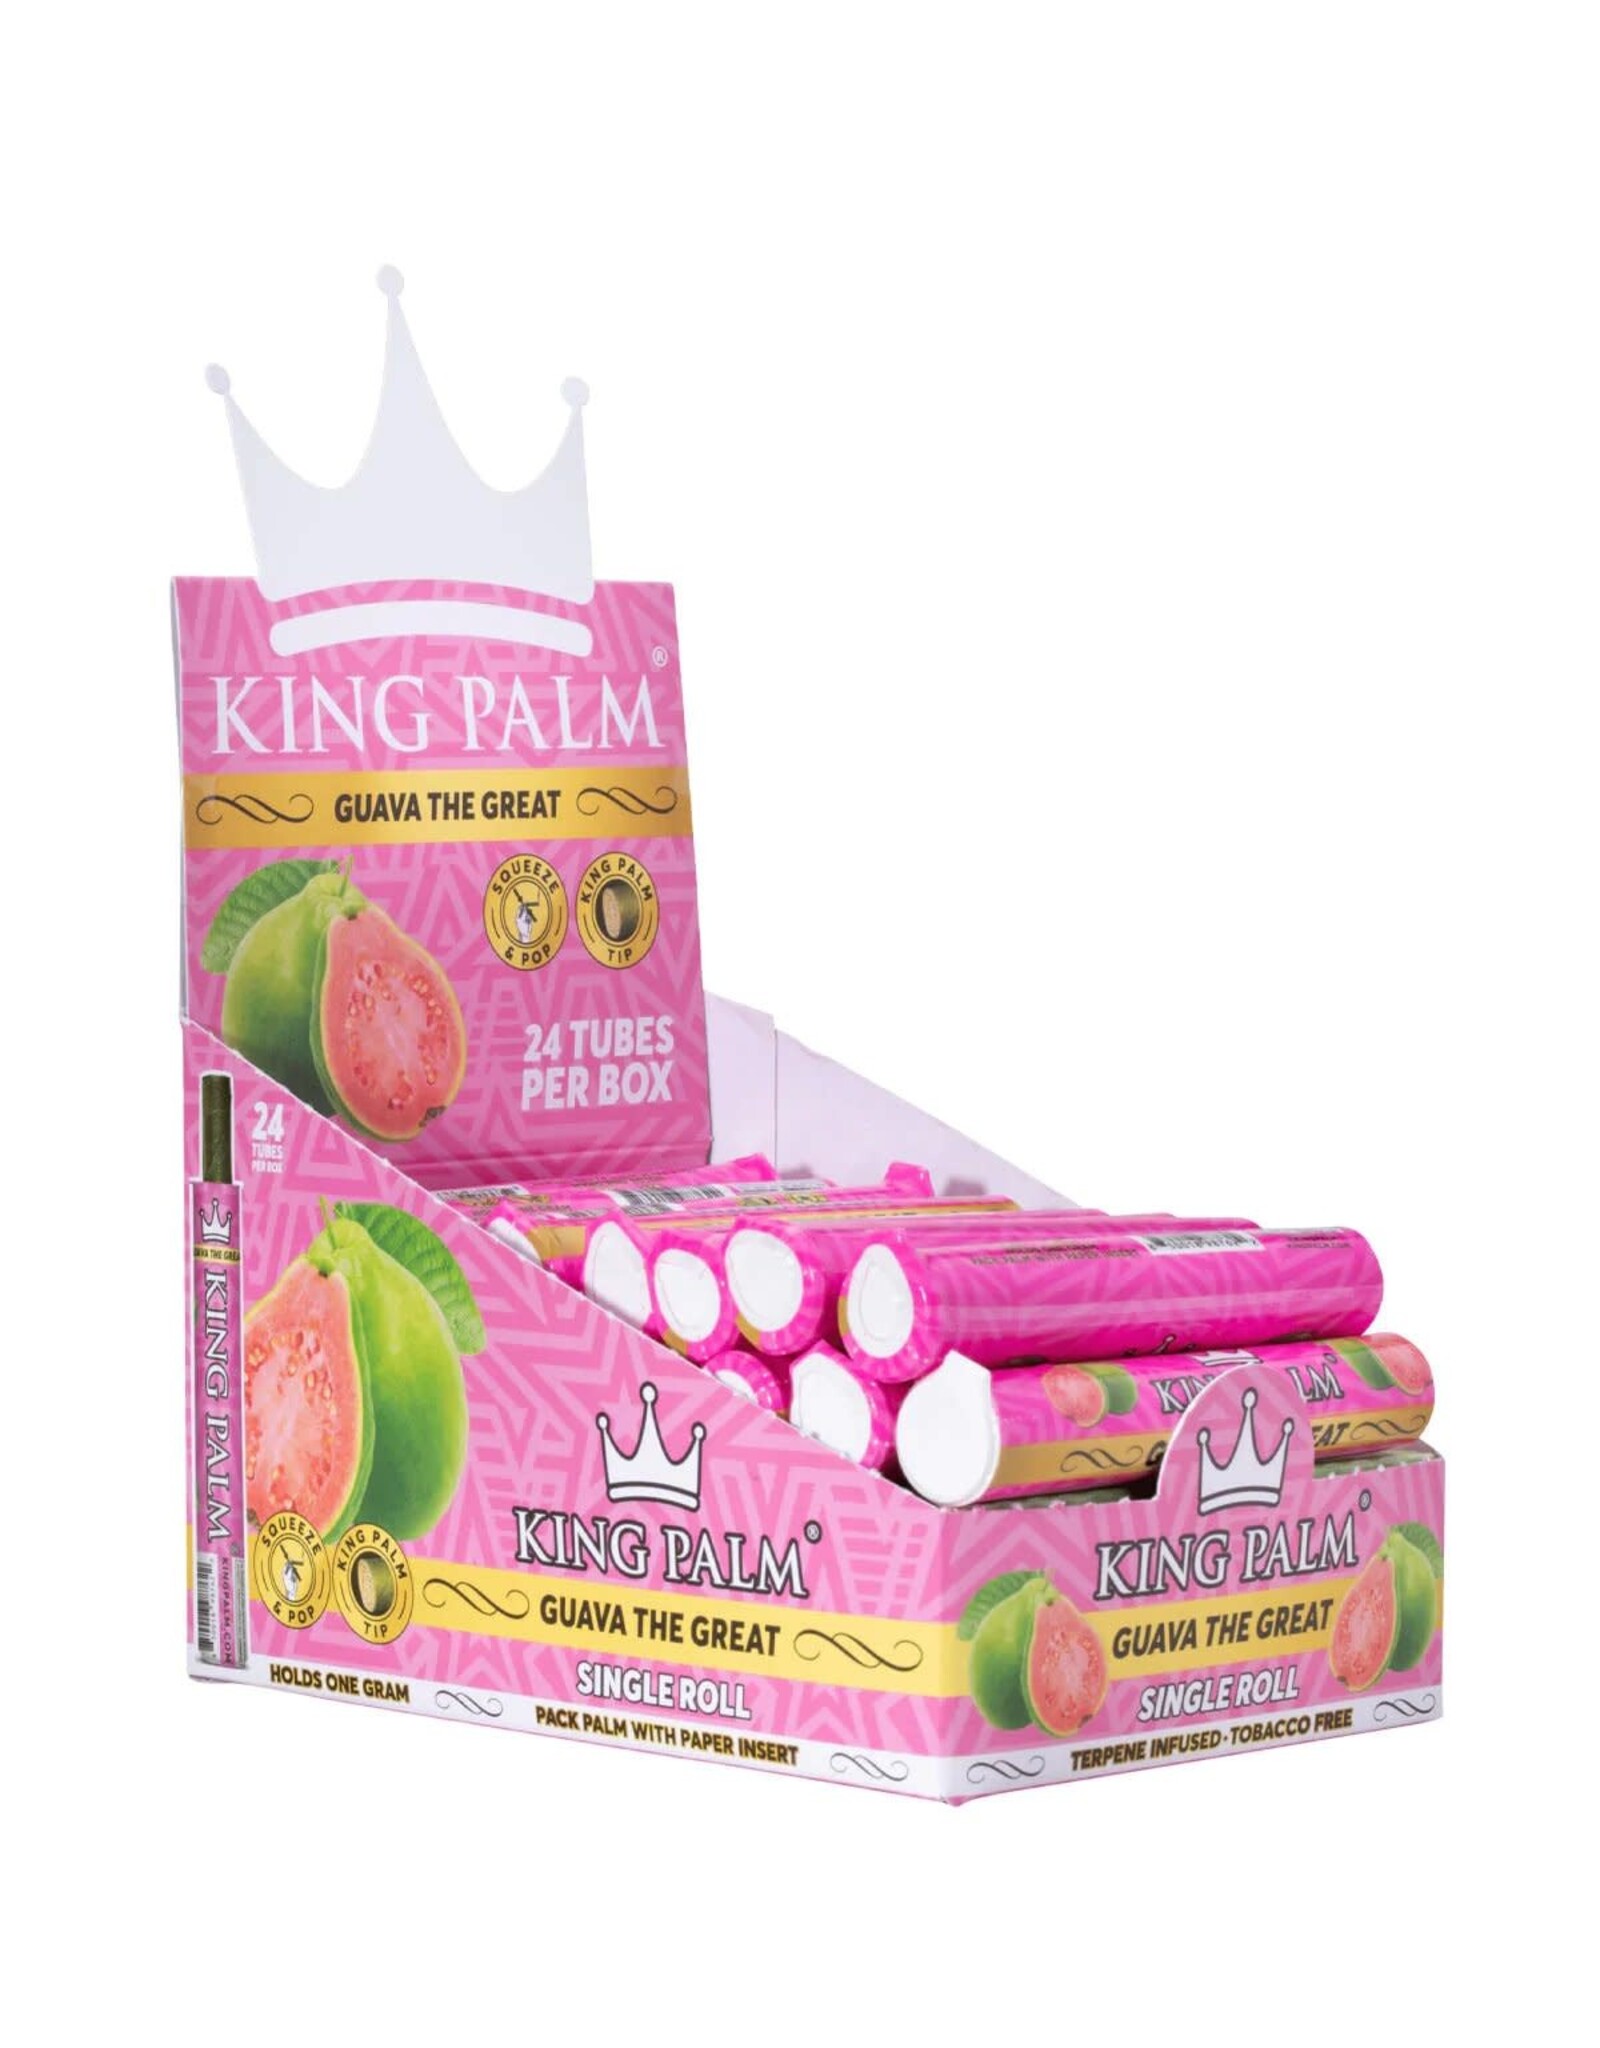 King Palm King Palm Cones Mini 1pk - Guava The Great